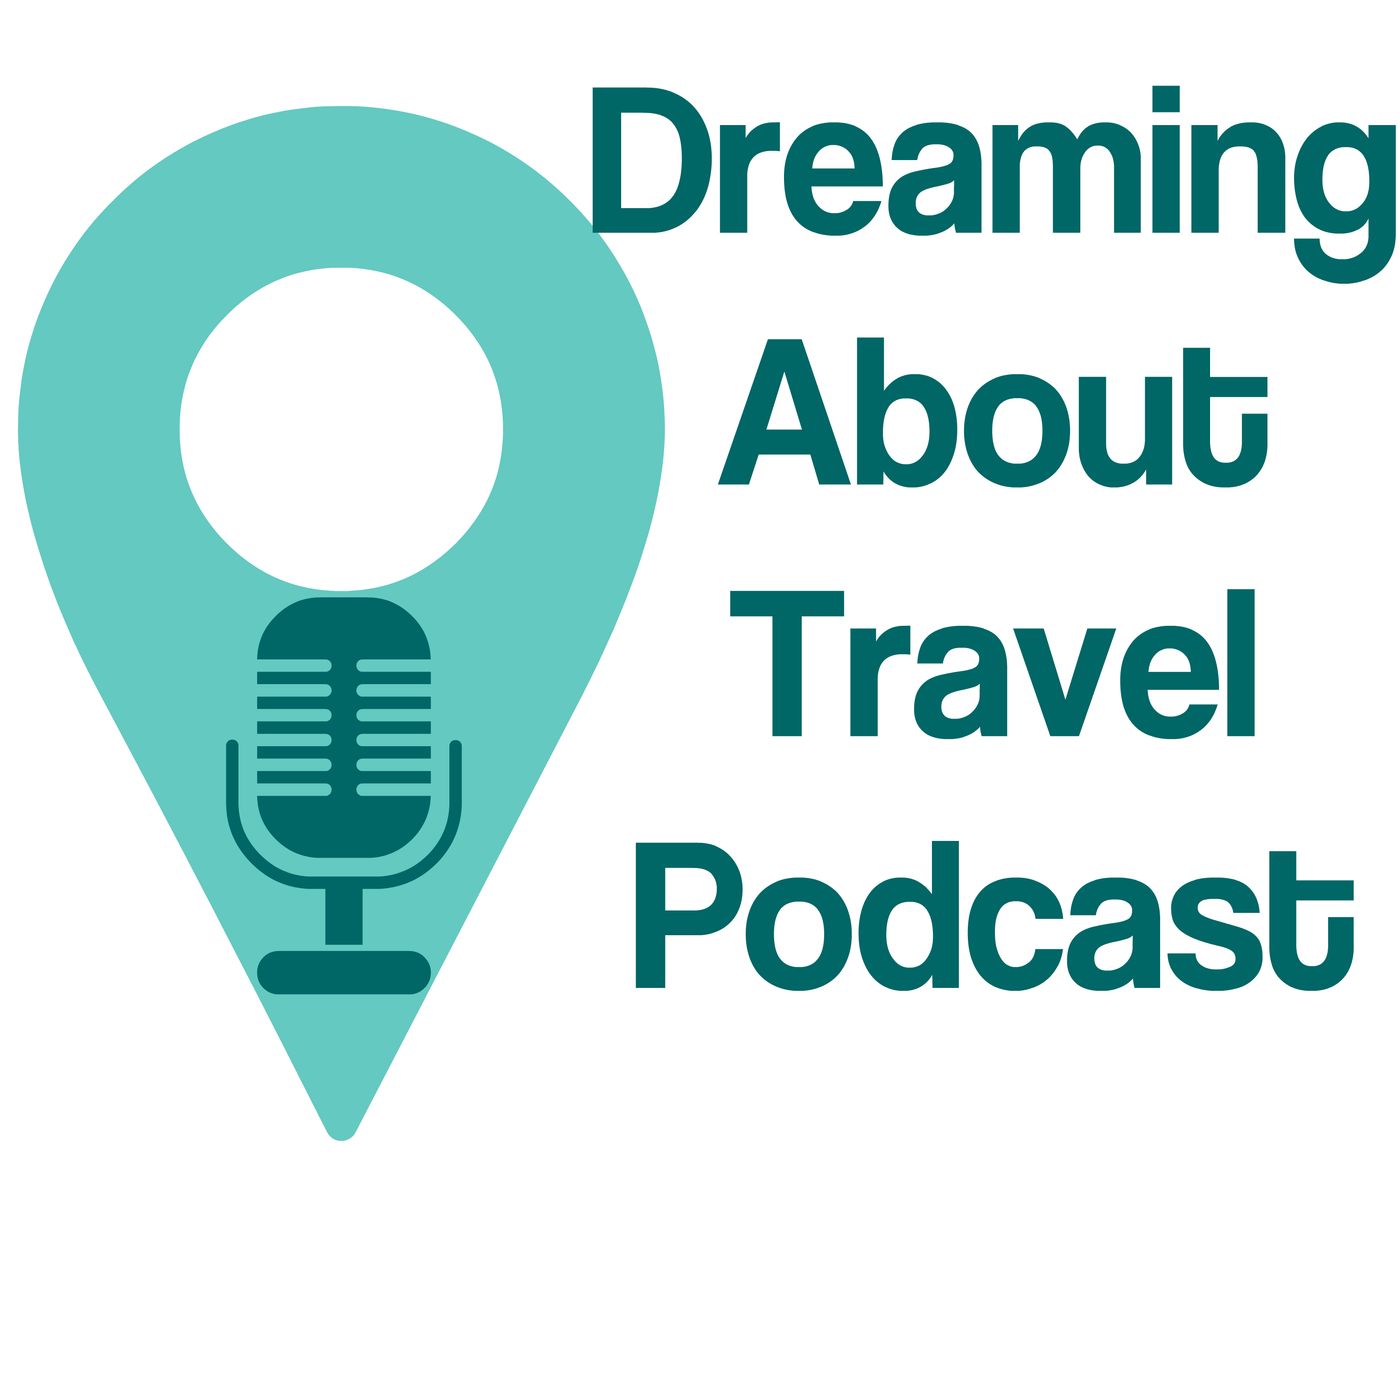 Dreaming About Travel Podcast